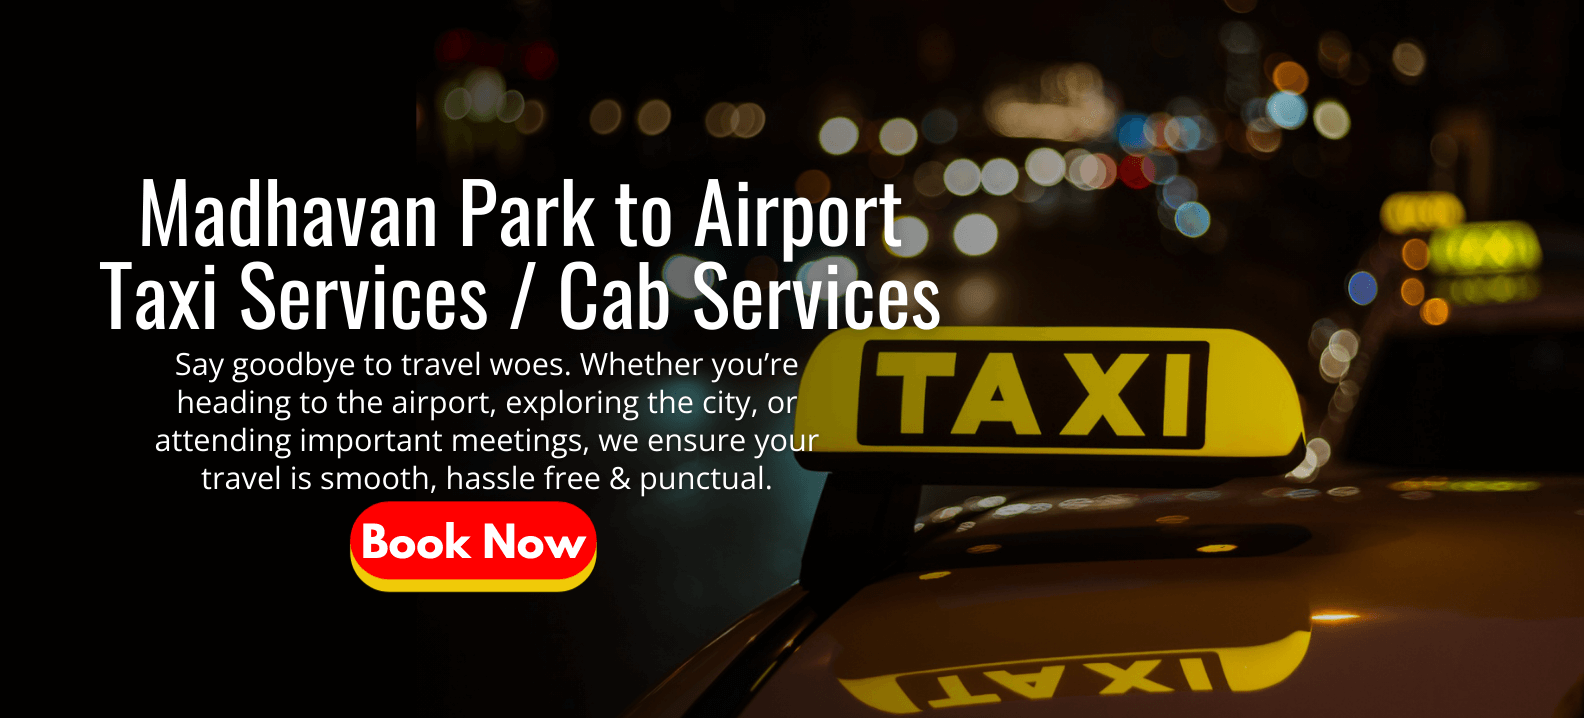 Madhavan Park to Airport Taxi Services _ Cab Services